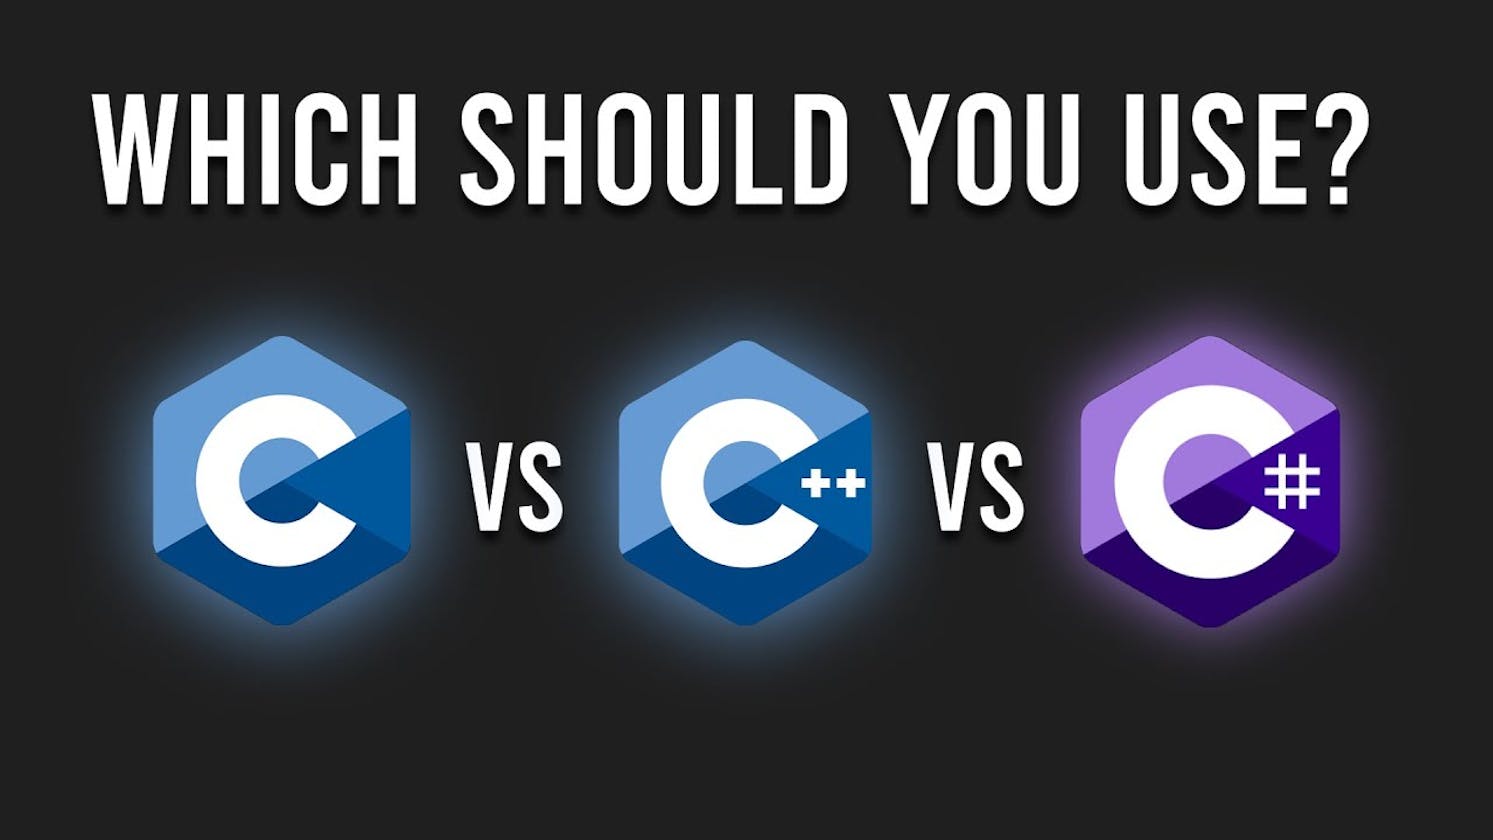 How Are C, C++, C#, and Objective-C Different?